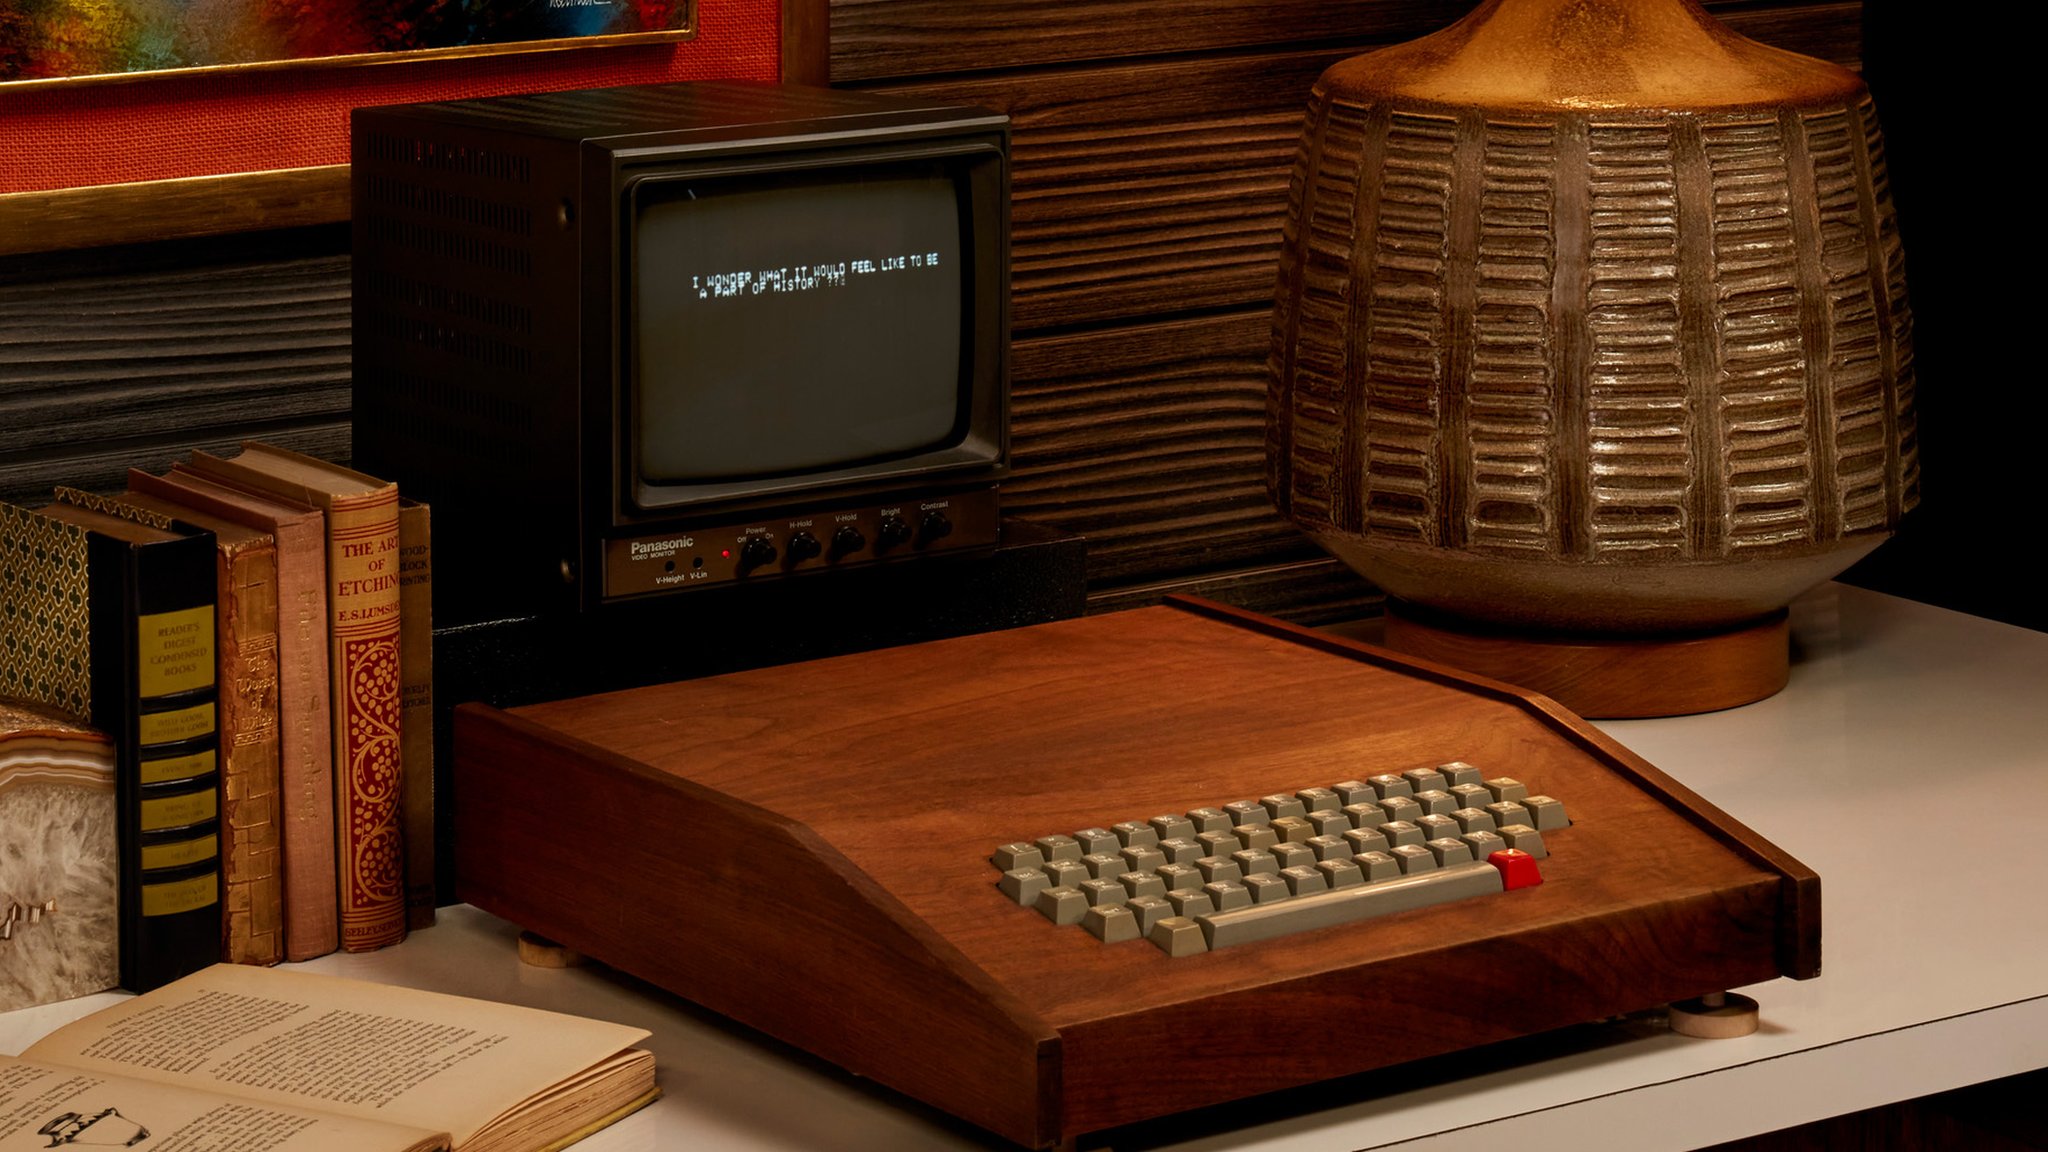 Rare Apple-1 computer sells for $223,000 at auction